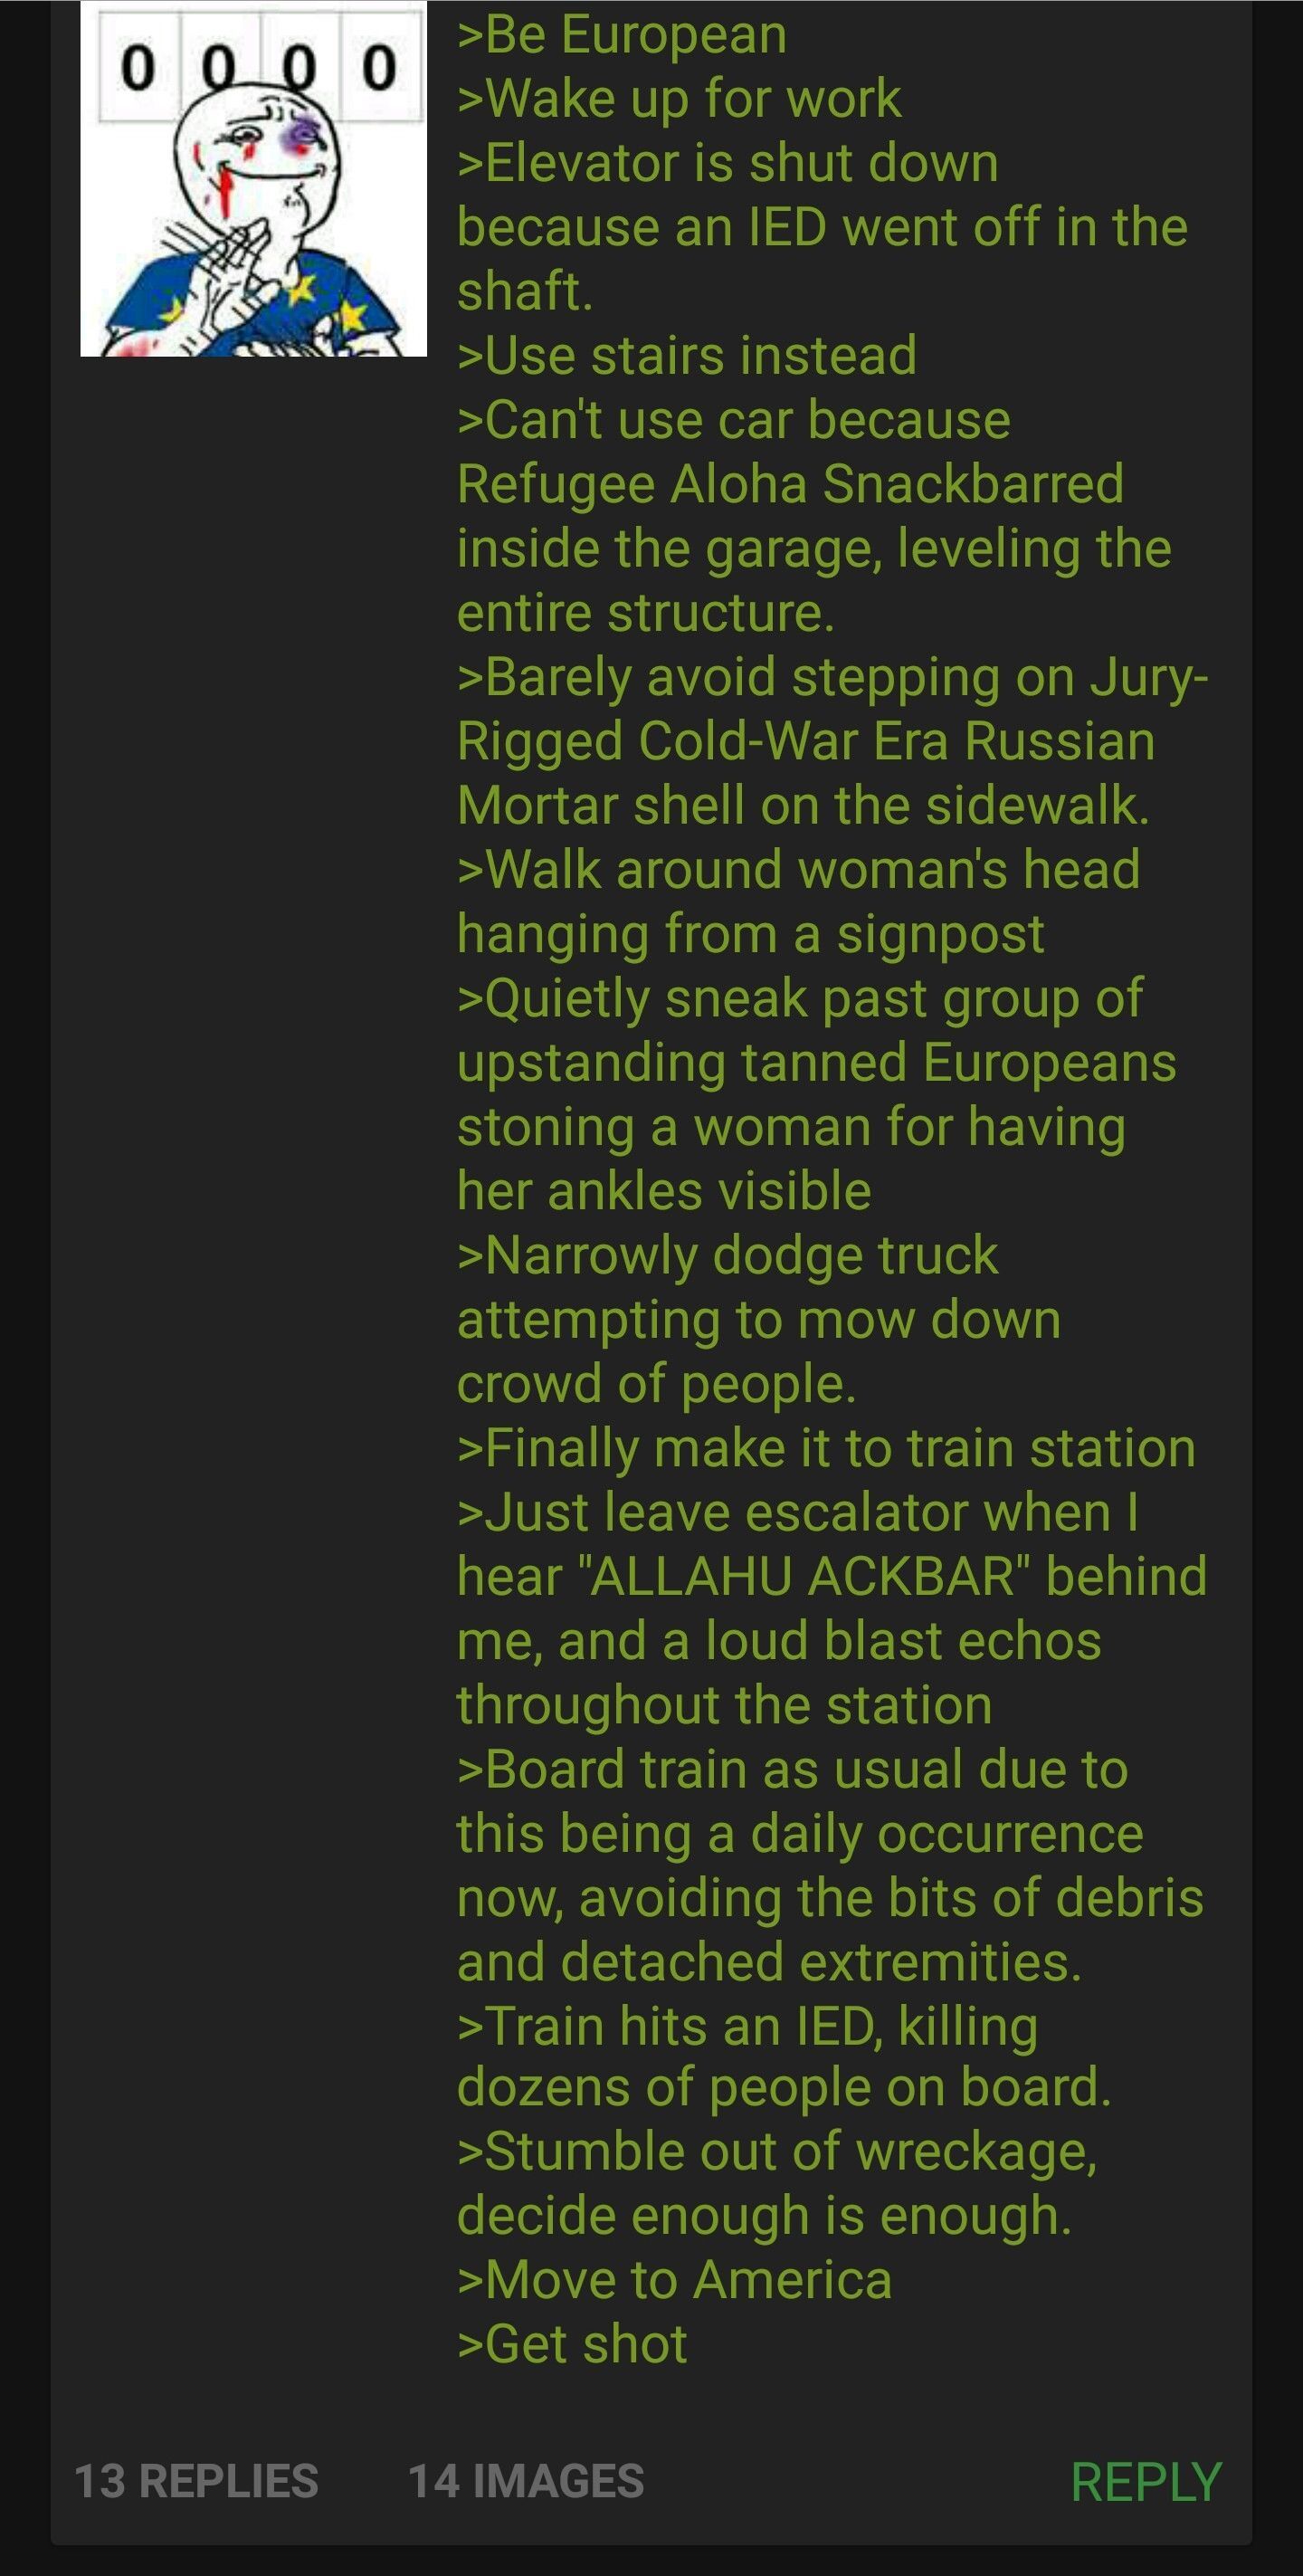 anon lives in europe